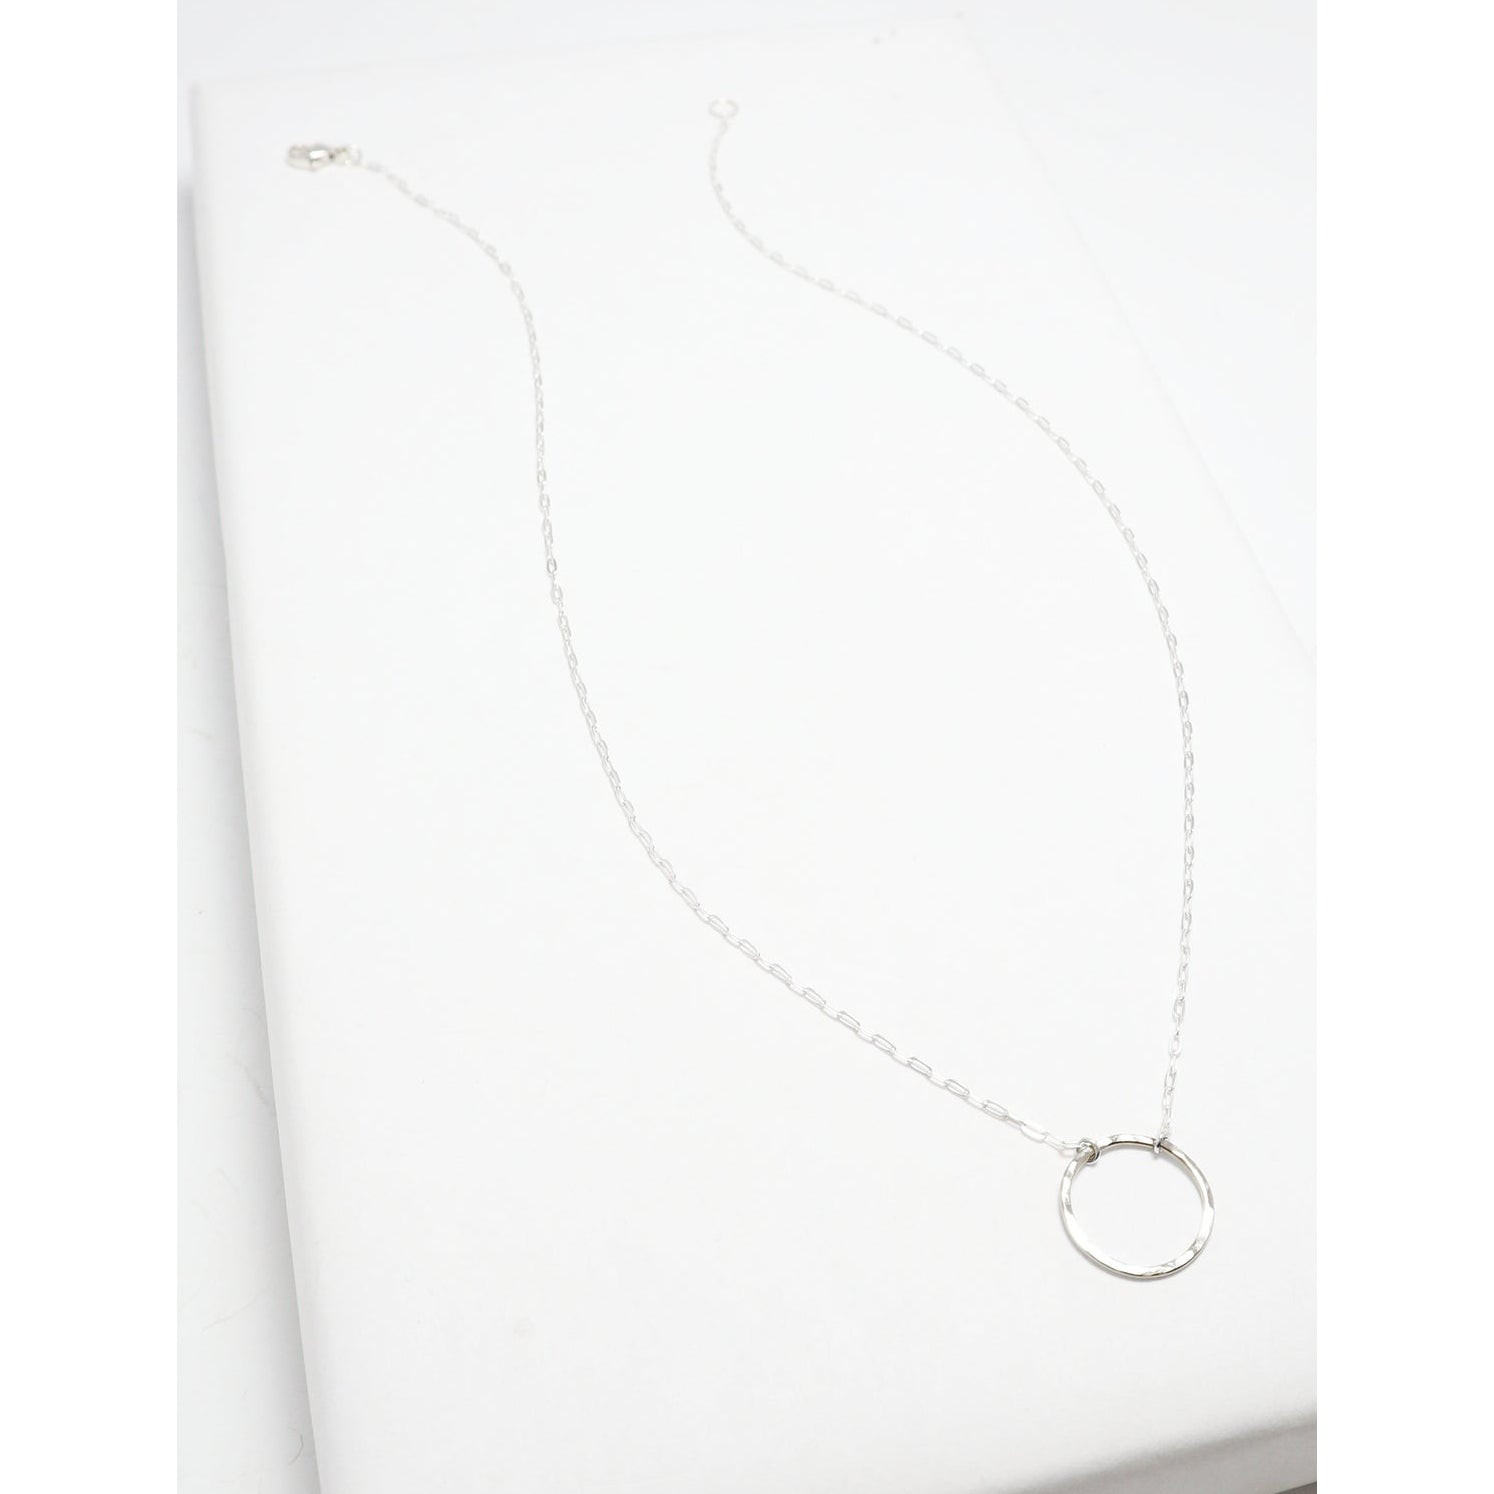 Unity Hammered Circle Necklace